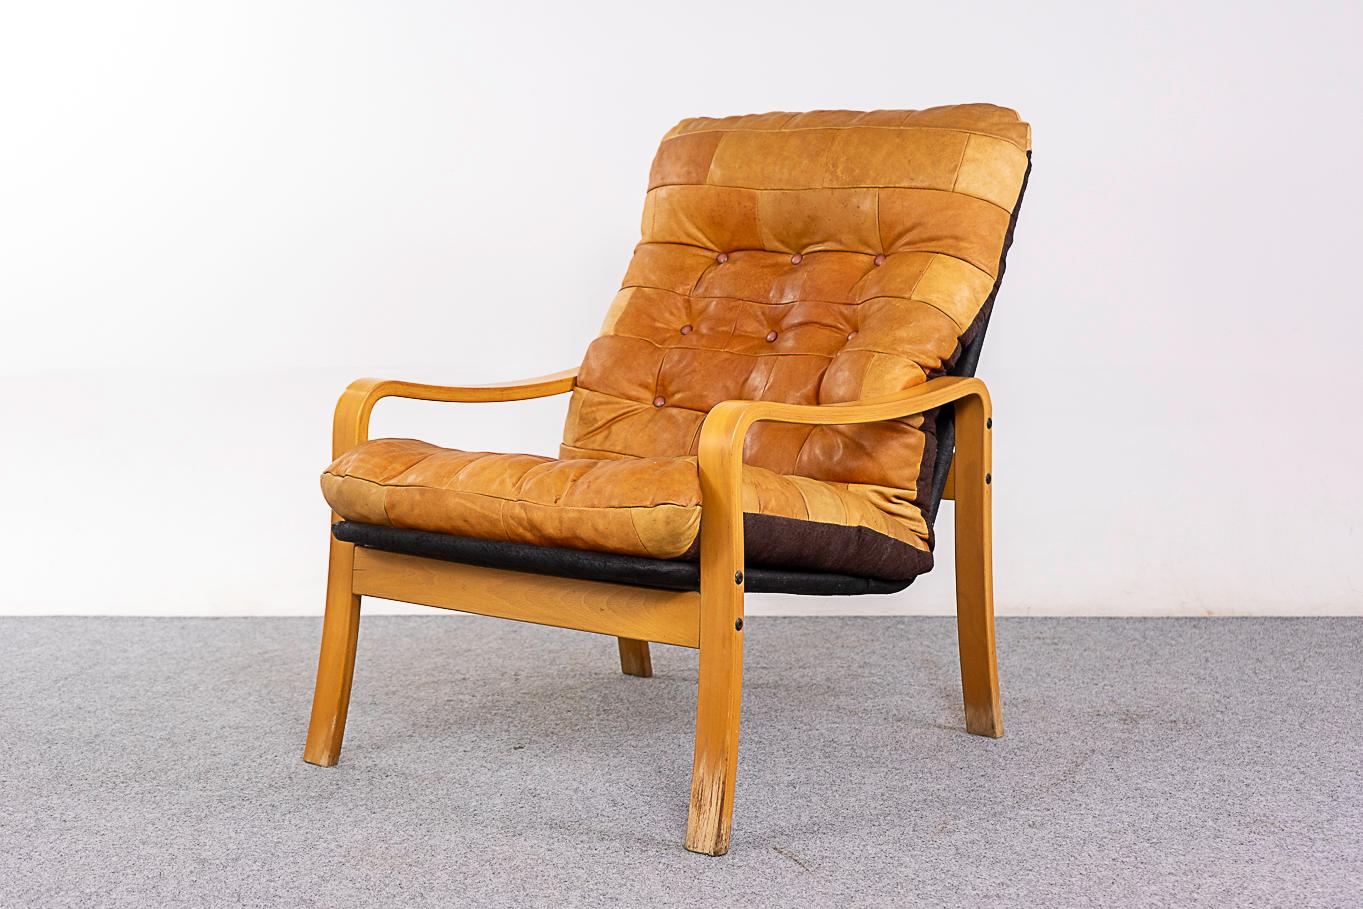 Beech & leather lounge chair, circa 1970's. Curvaceous frame with original patchwork leather upholstery, some wear & tear.

Unrestored item with option to purchase in restored condition for an additional $200 USD. Restoration includes: repairs,